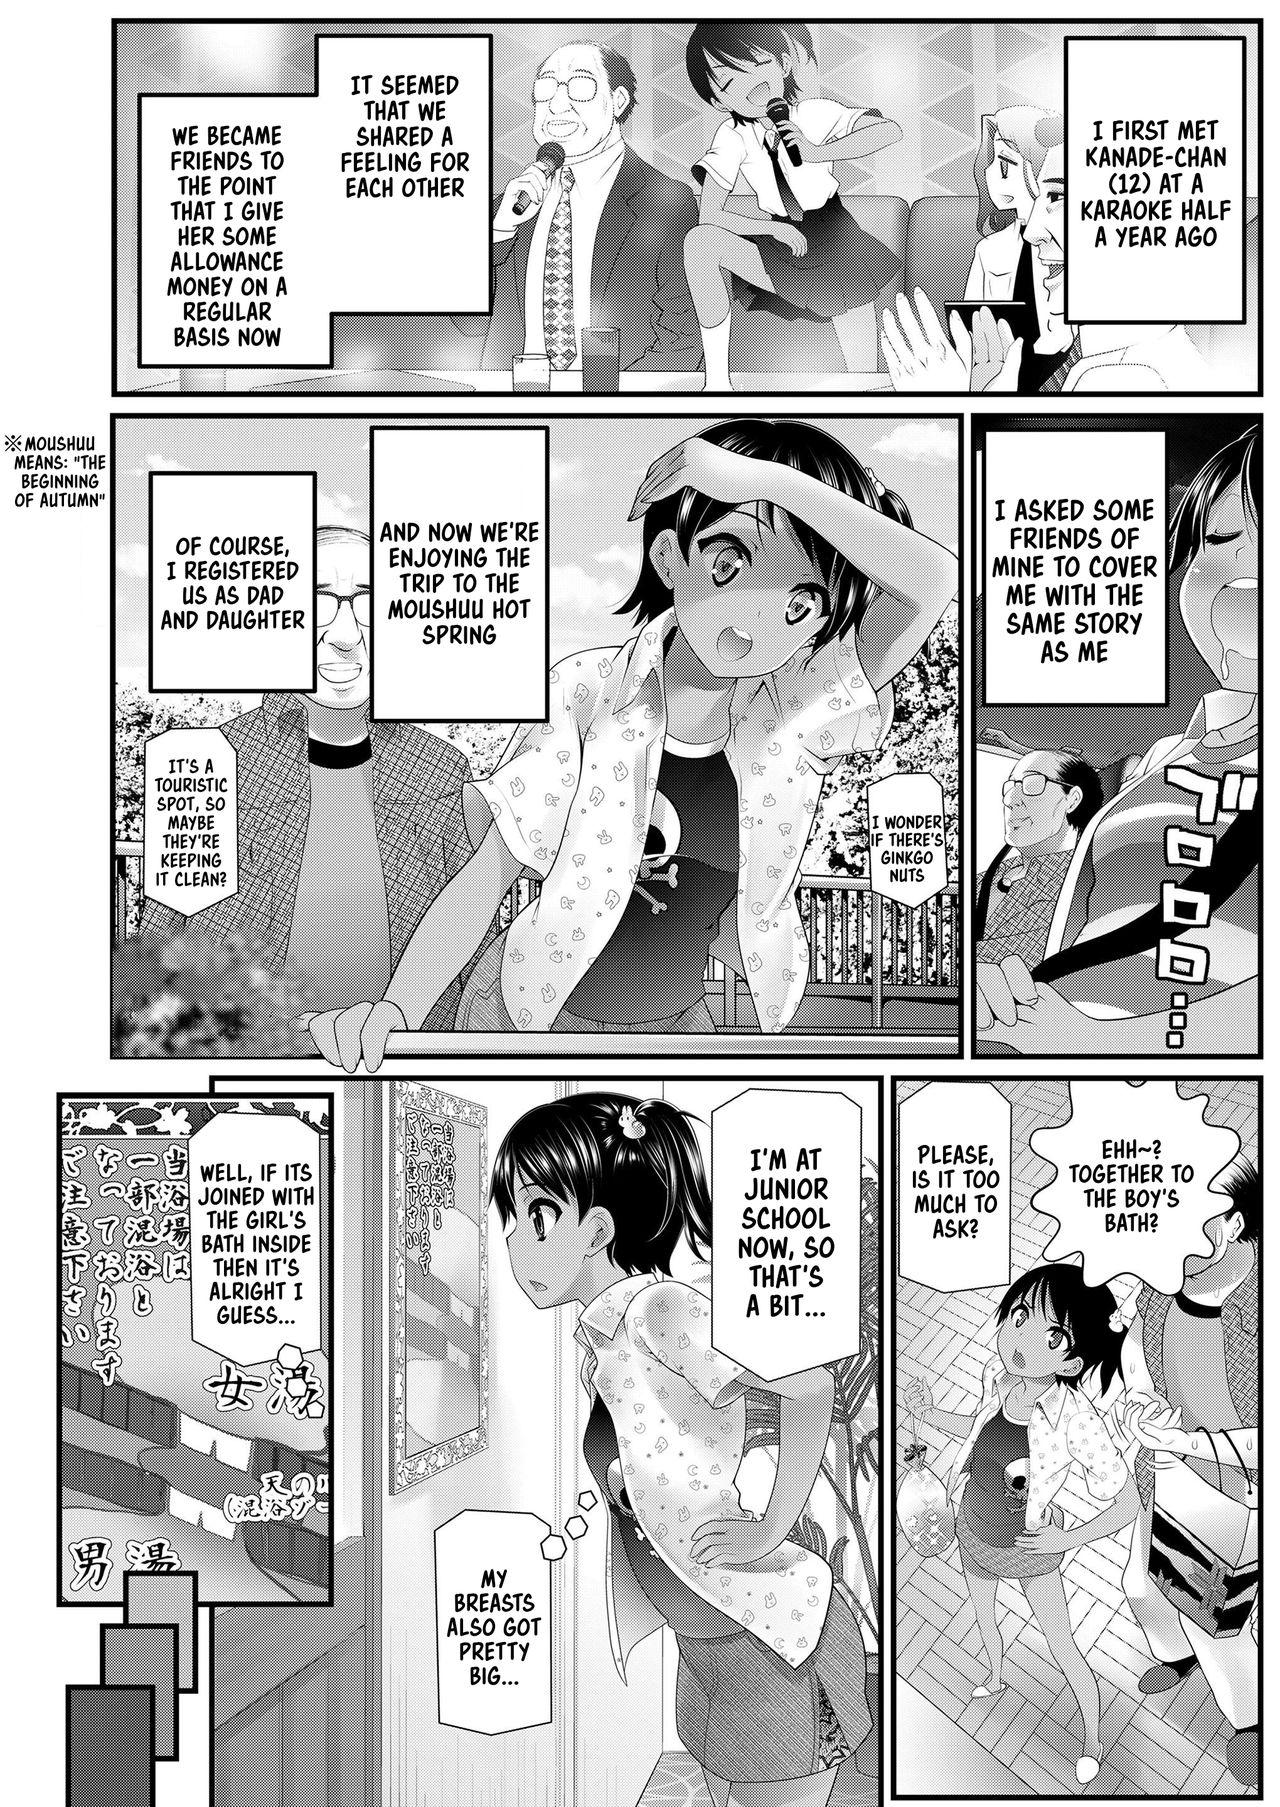 Gritona Musume Sedai to Furin Ryokou | Immoral trip with a girl young enough to be my daughter Licking Pussy - Page 2